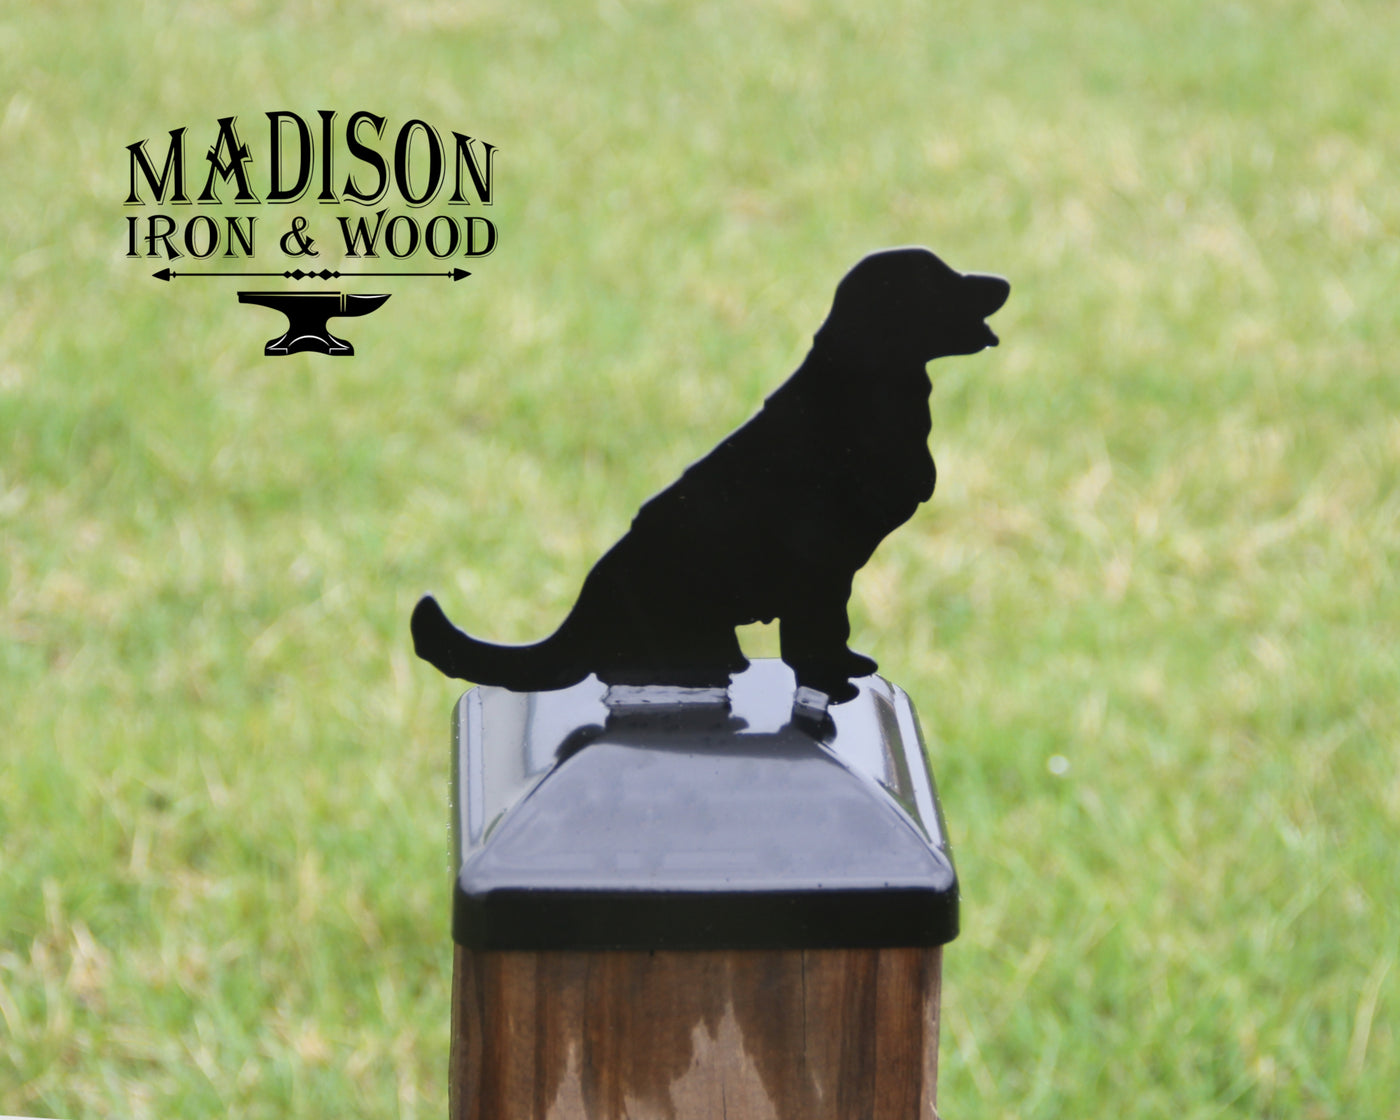 6x6 Golden Retriever Post Cap - Madison Iron and Wood - Post Cap - metal outdoor decor - Steel deocrations - american made products - veteran owned business products - fencing decorations - fencing supplies - custom wall decorations - personalized wall signs - steel - decorative post caps - steel post caps - metal post caps - brackets - structural brackets - home improvement - easter - easter decorations - easter gift - easter yard decor